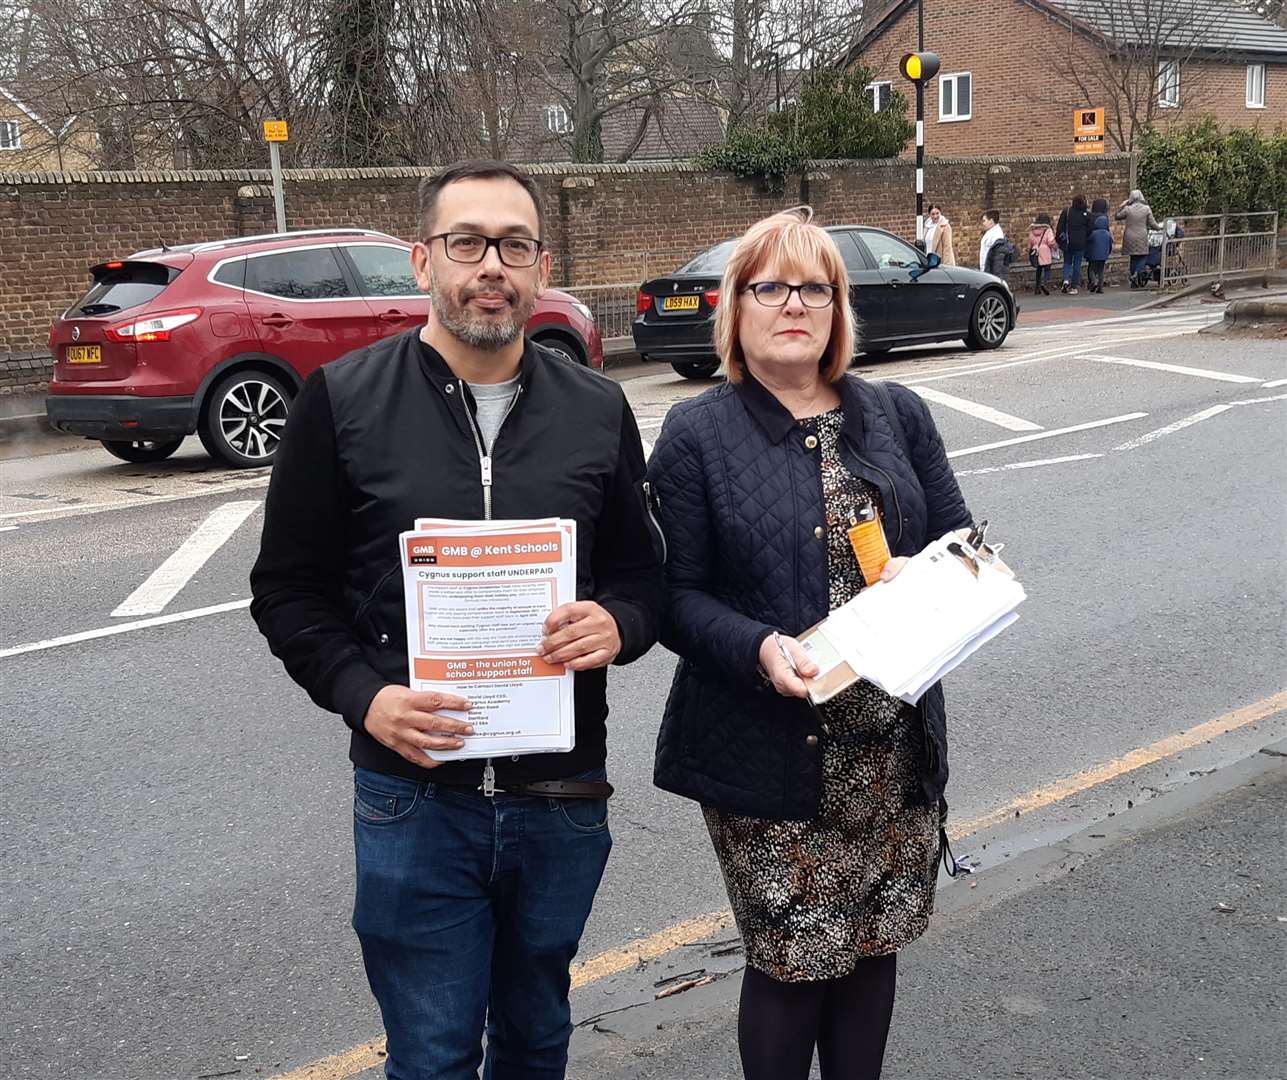 GMB union campaigners Nick Day and Jackie Warr held discussions with parents outside the Brent Primary School in Dartford